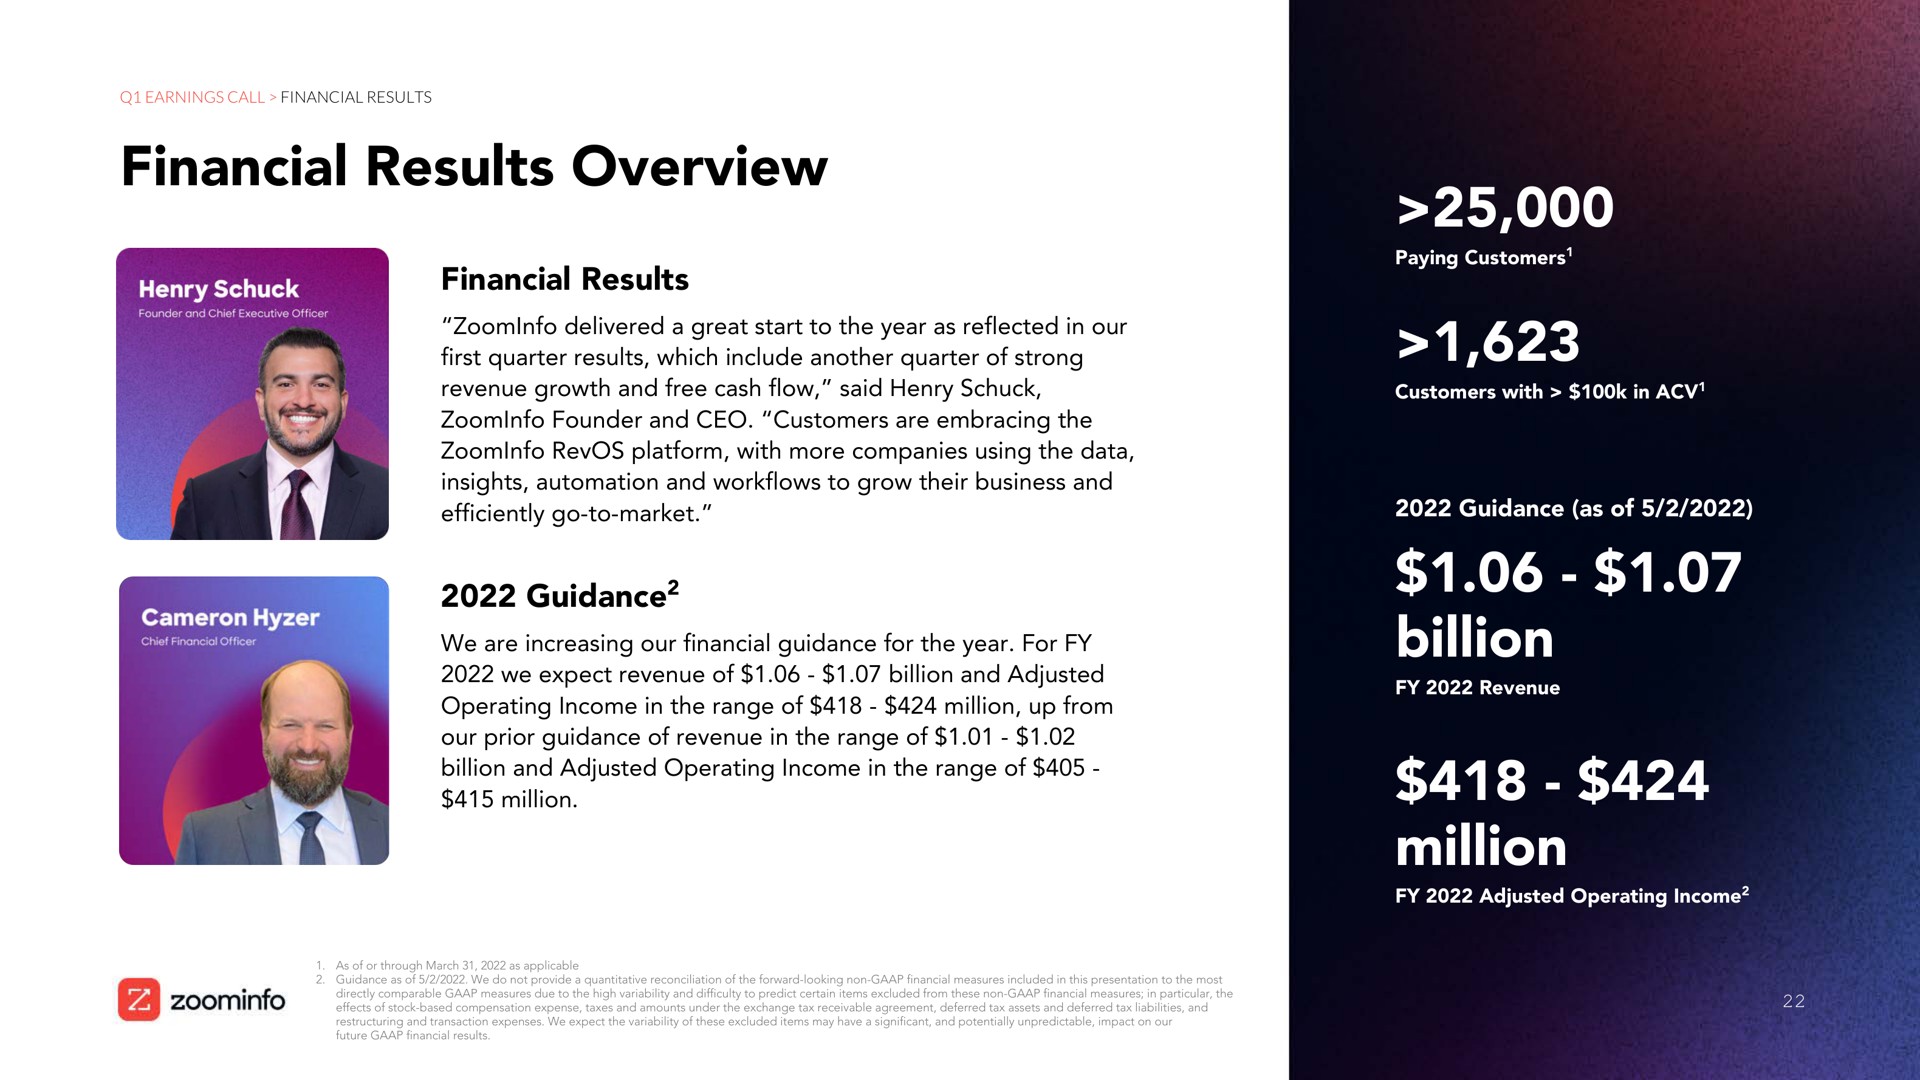 financial results overview billion million | Zoominfo